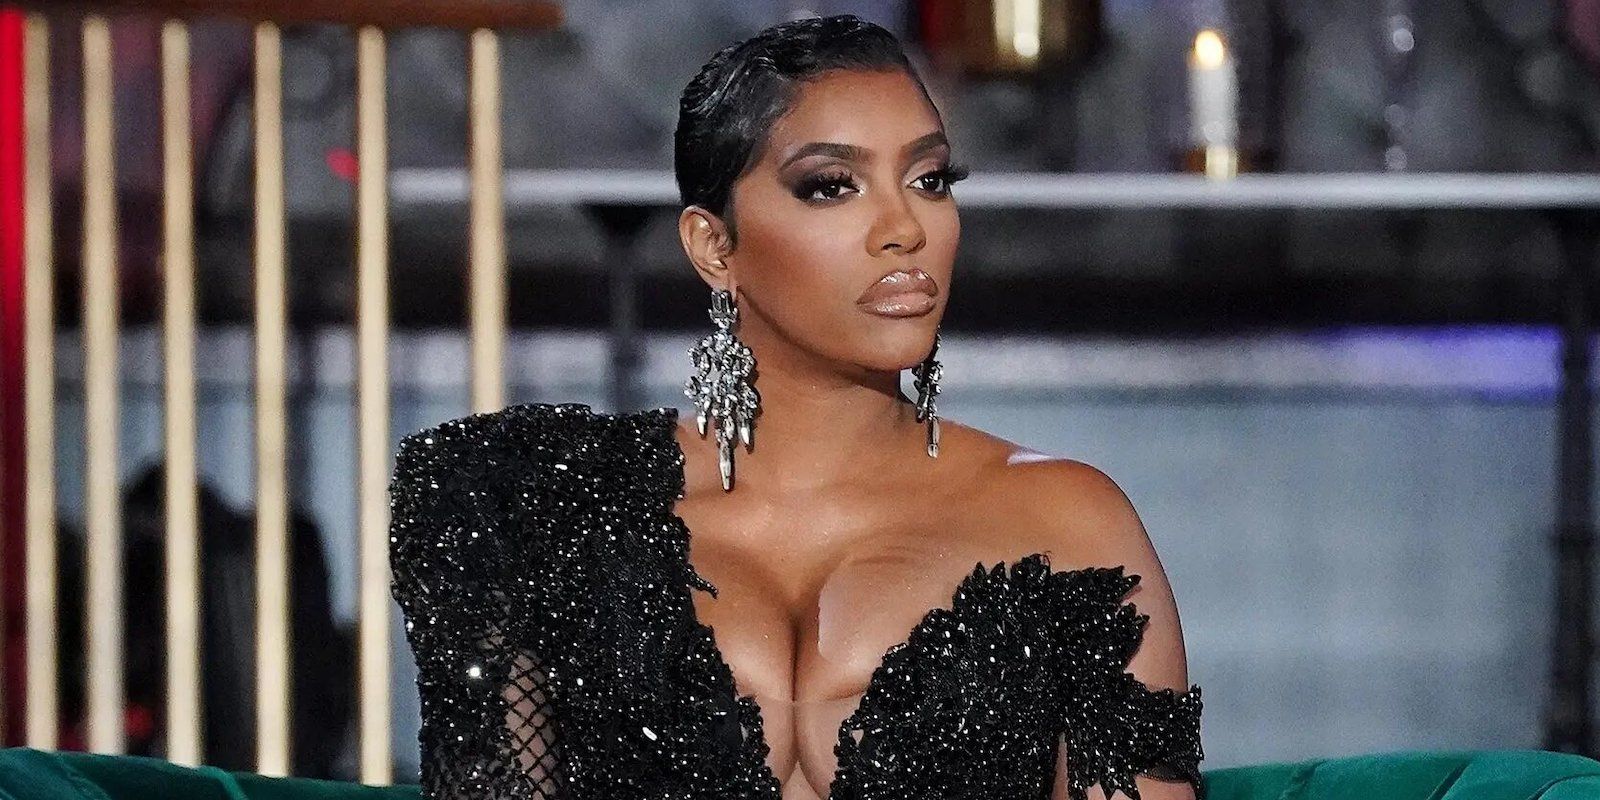 Porsha Williams sits in Black gown at RHOA S13 reunion